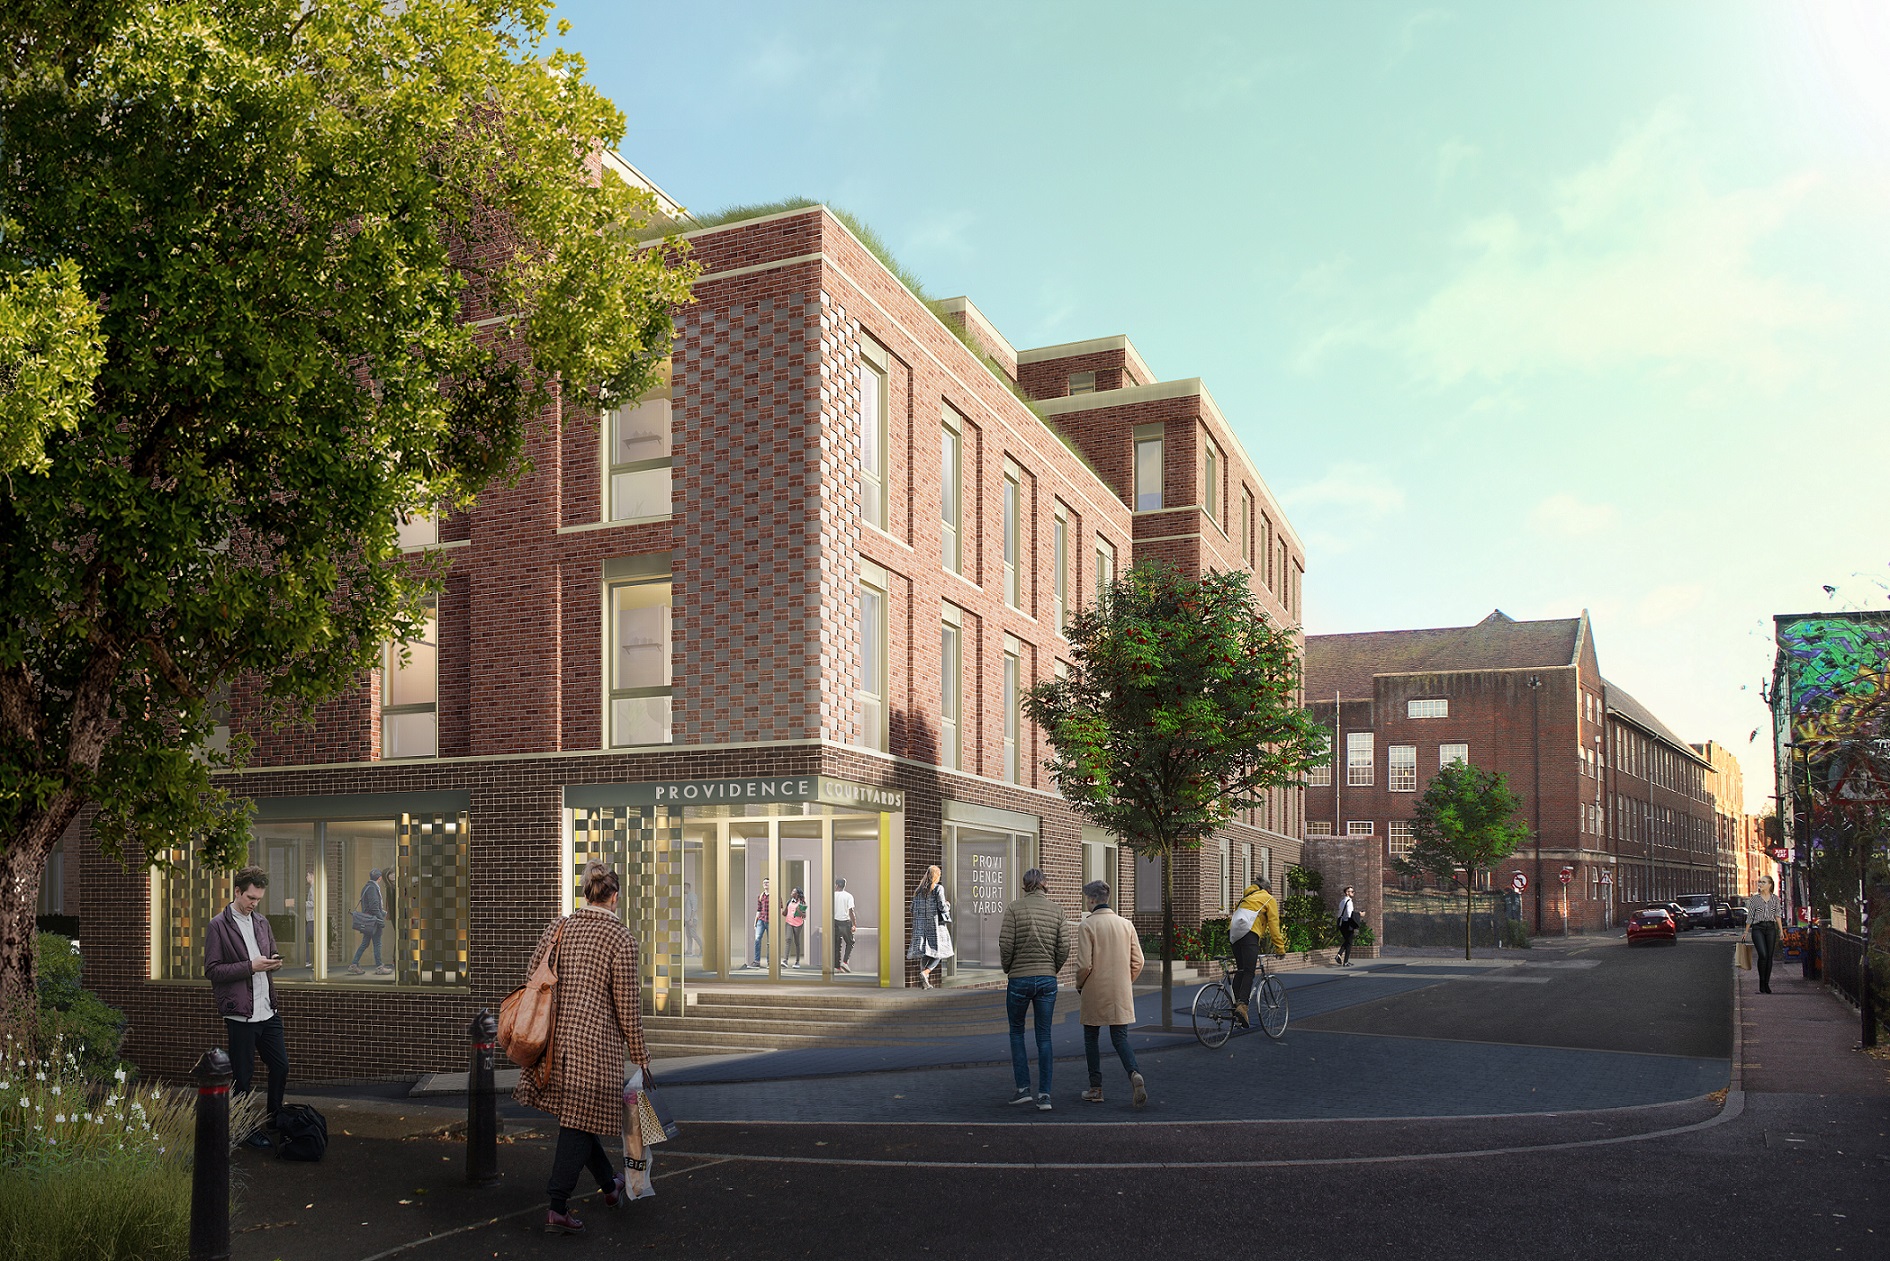 Plans revealed for new mixed-use regeneration development in Brighton @HWAengineers @MorganCarn